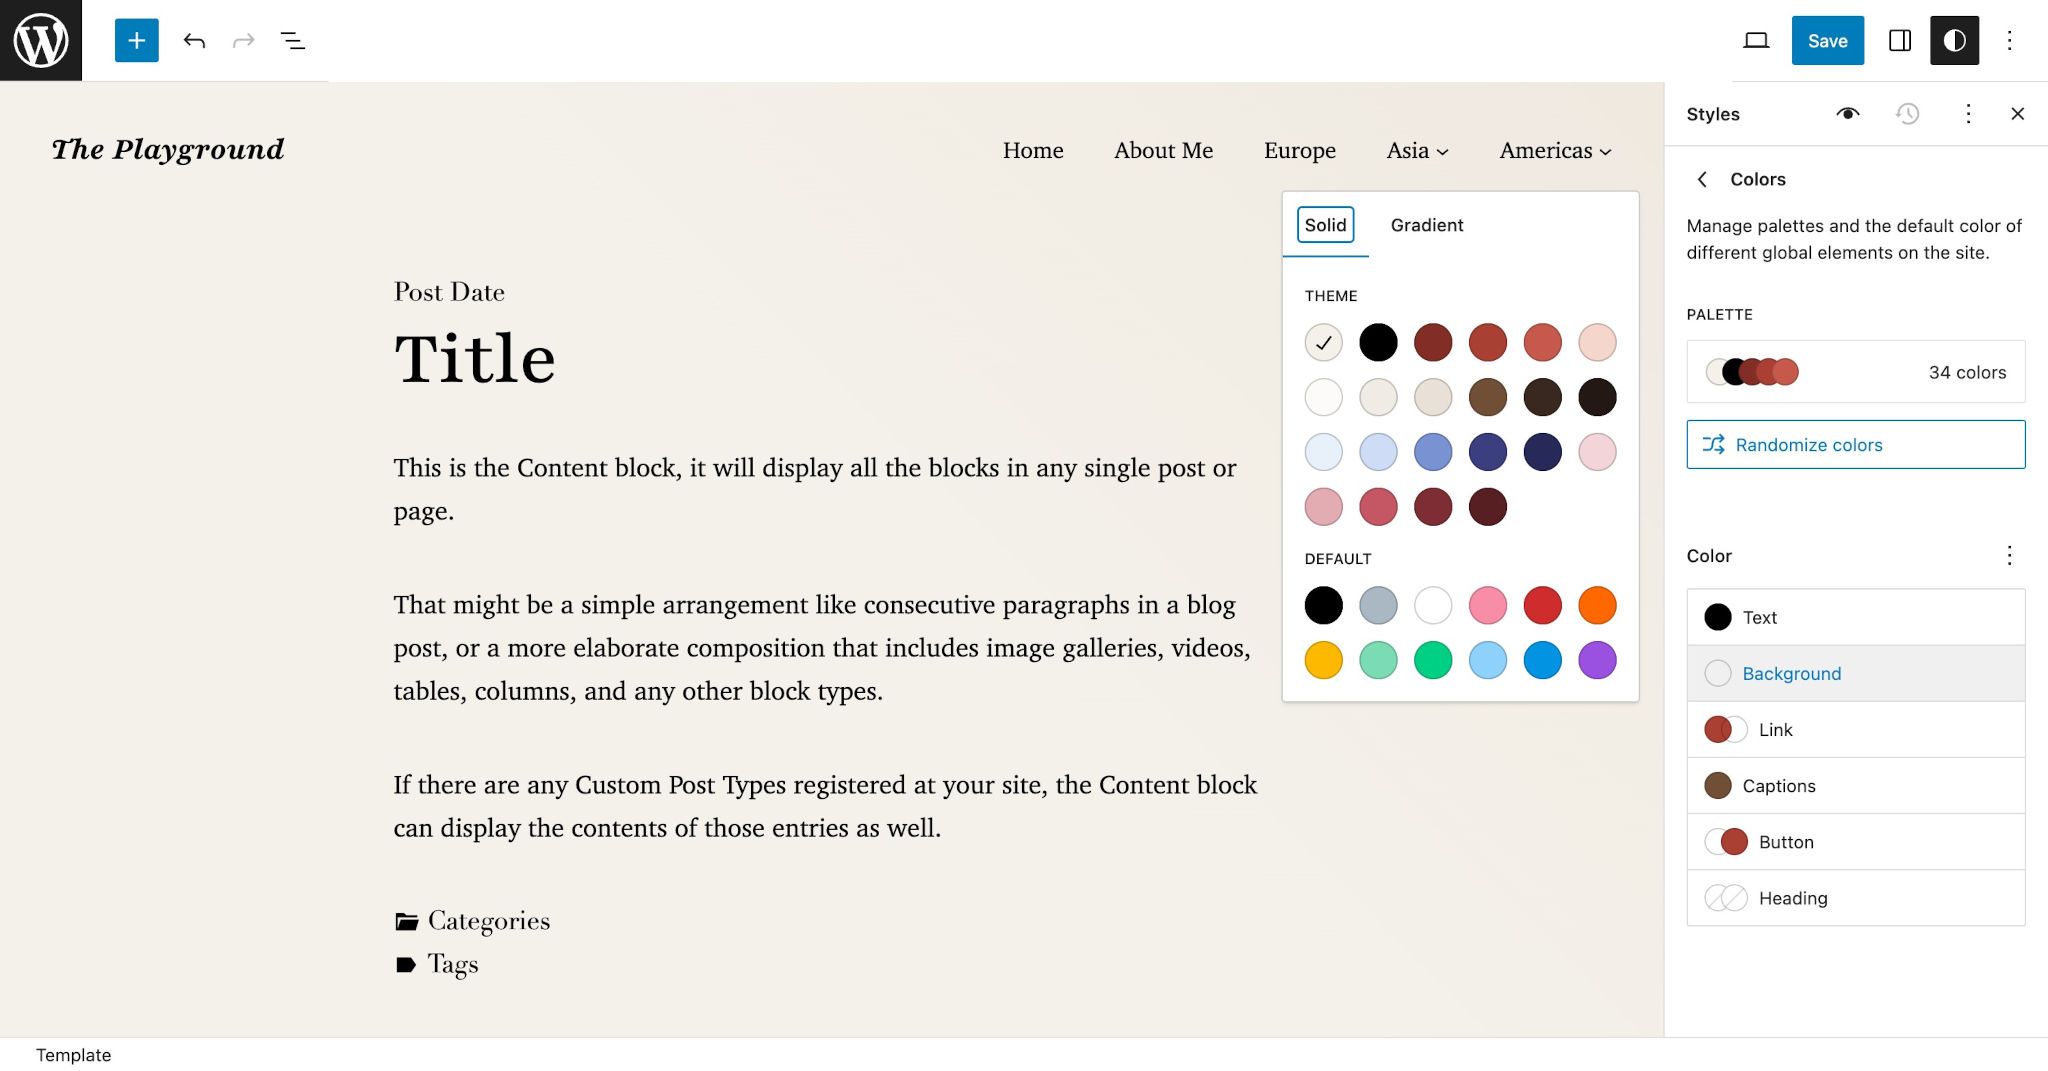 WordPress Site Editor with Styles interface open, showing the theme's colors.